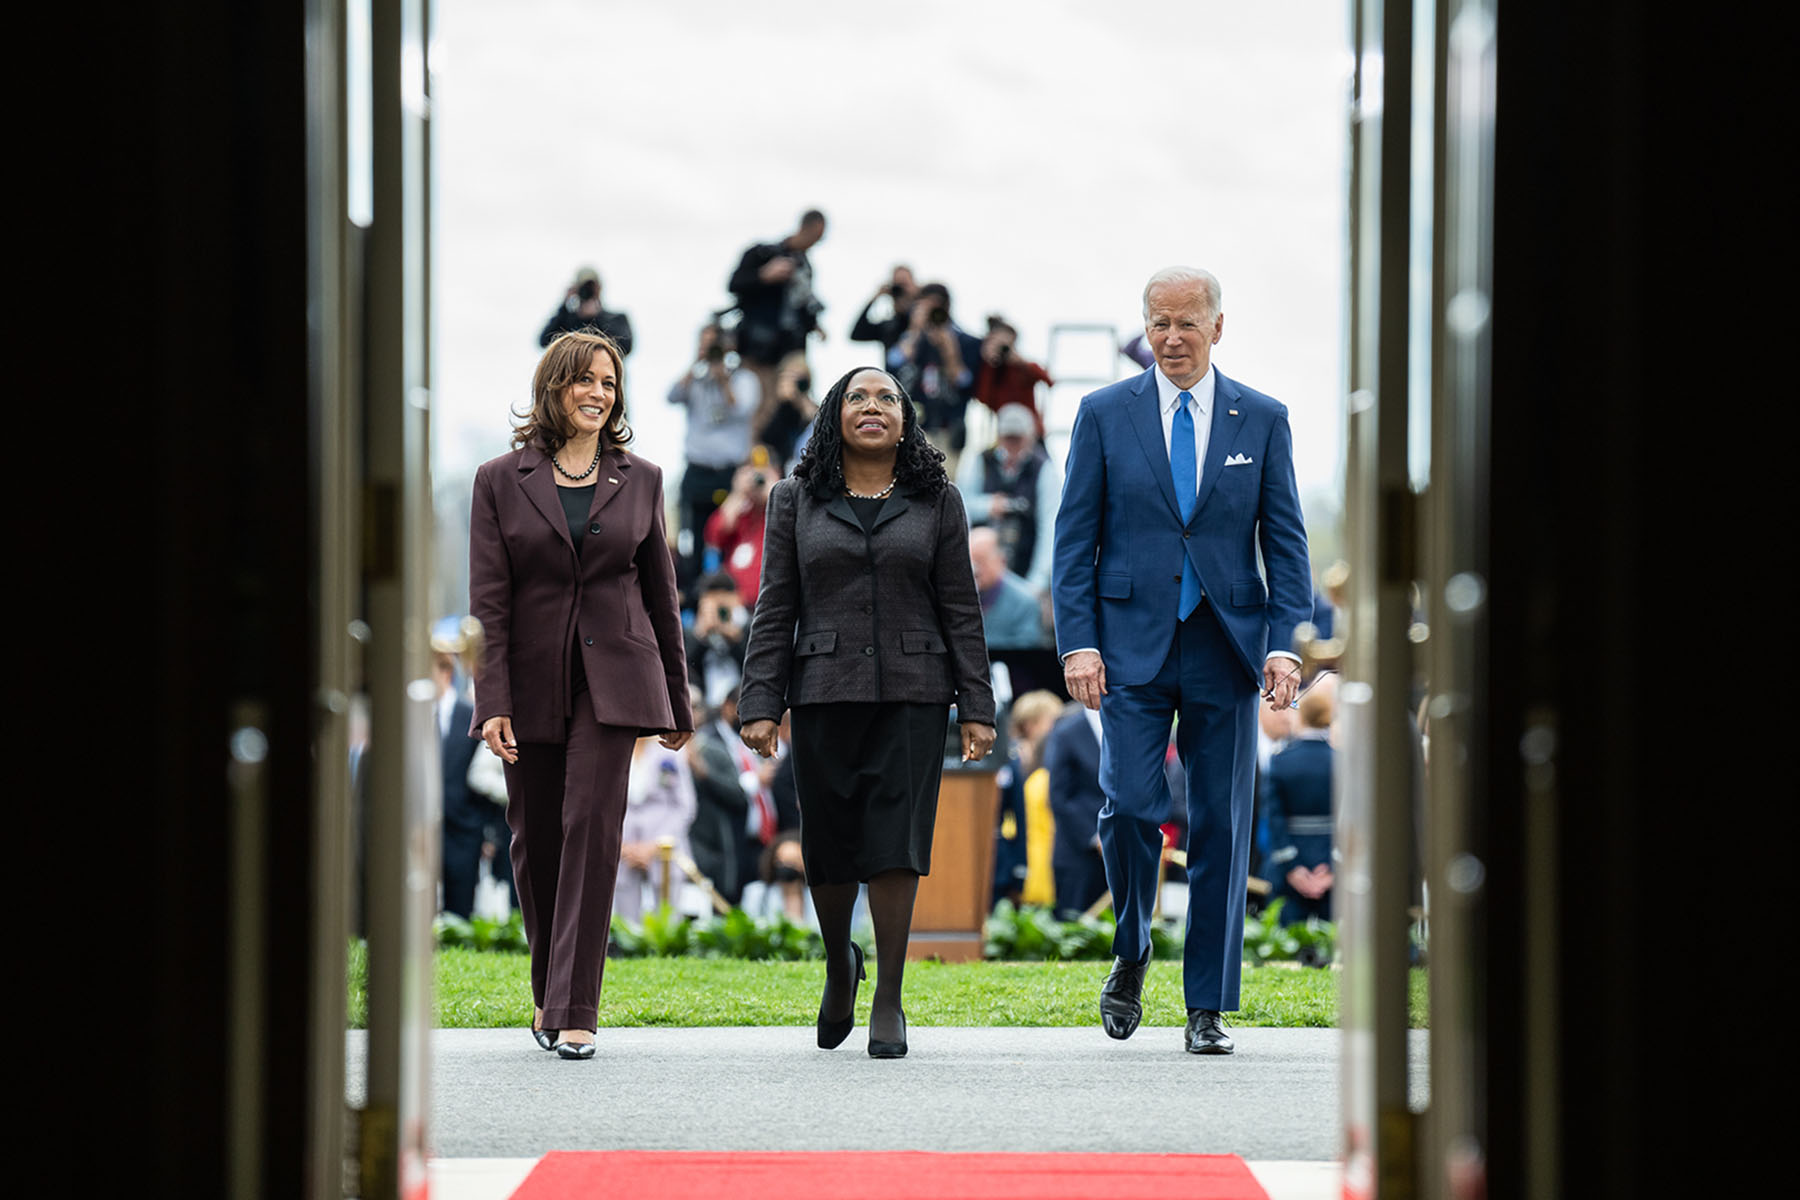 President Joe Biden and Vice President Kamala Harris return to the White House with Supreme Court Justice Ketanji Brown Jackson following an event on the South Lawn to commemorate her confirmation.